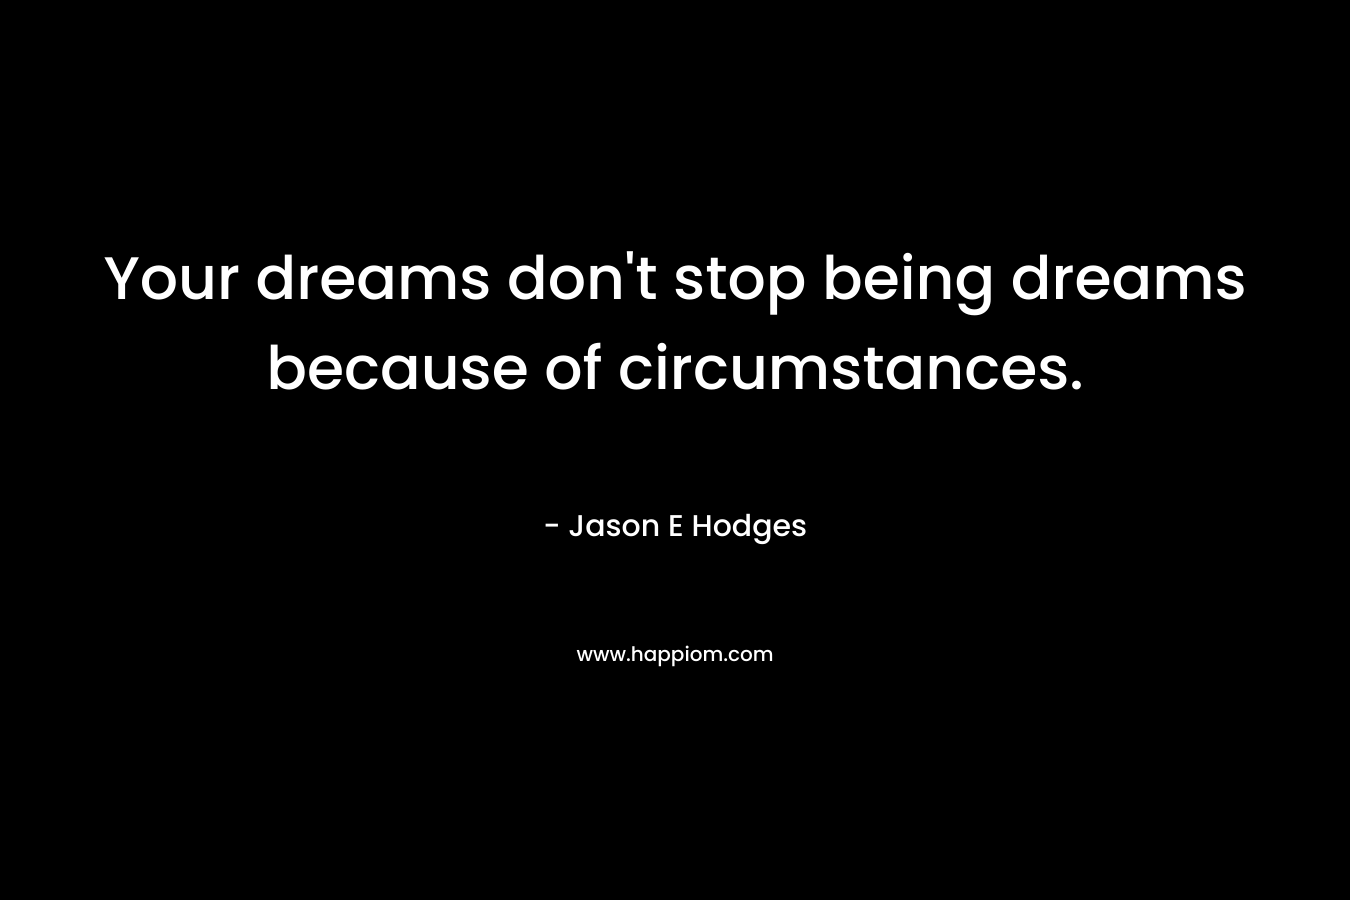 Your dreams don't stop being dreams because of circumstances.